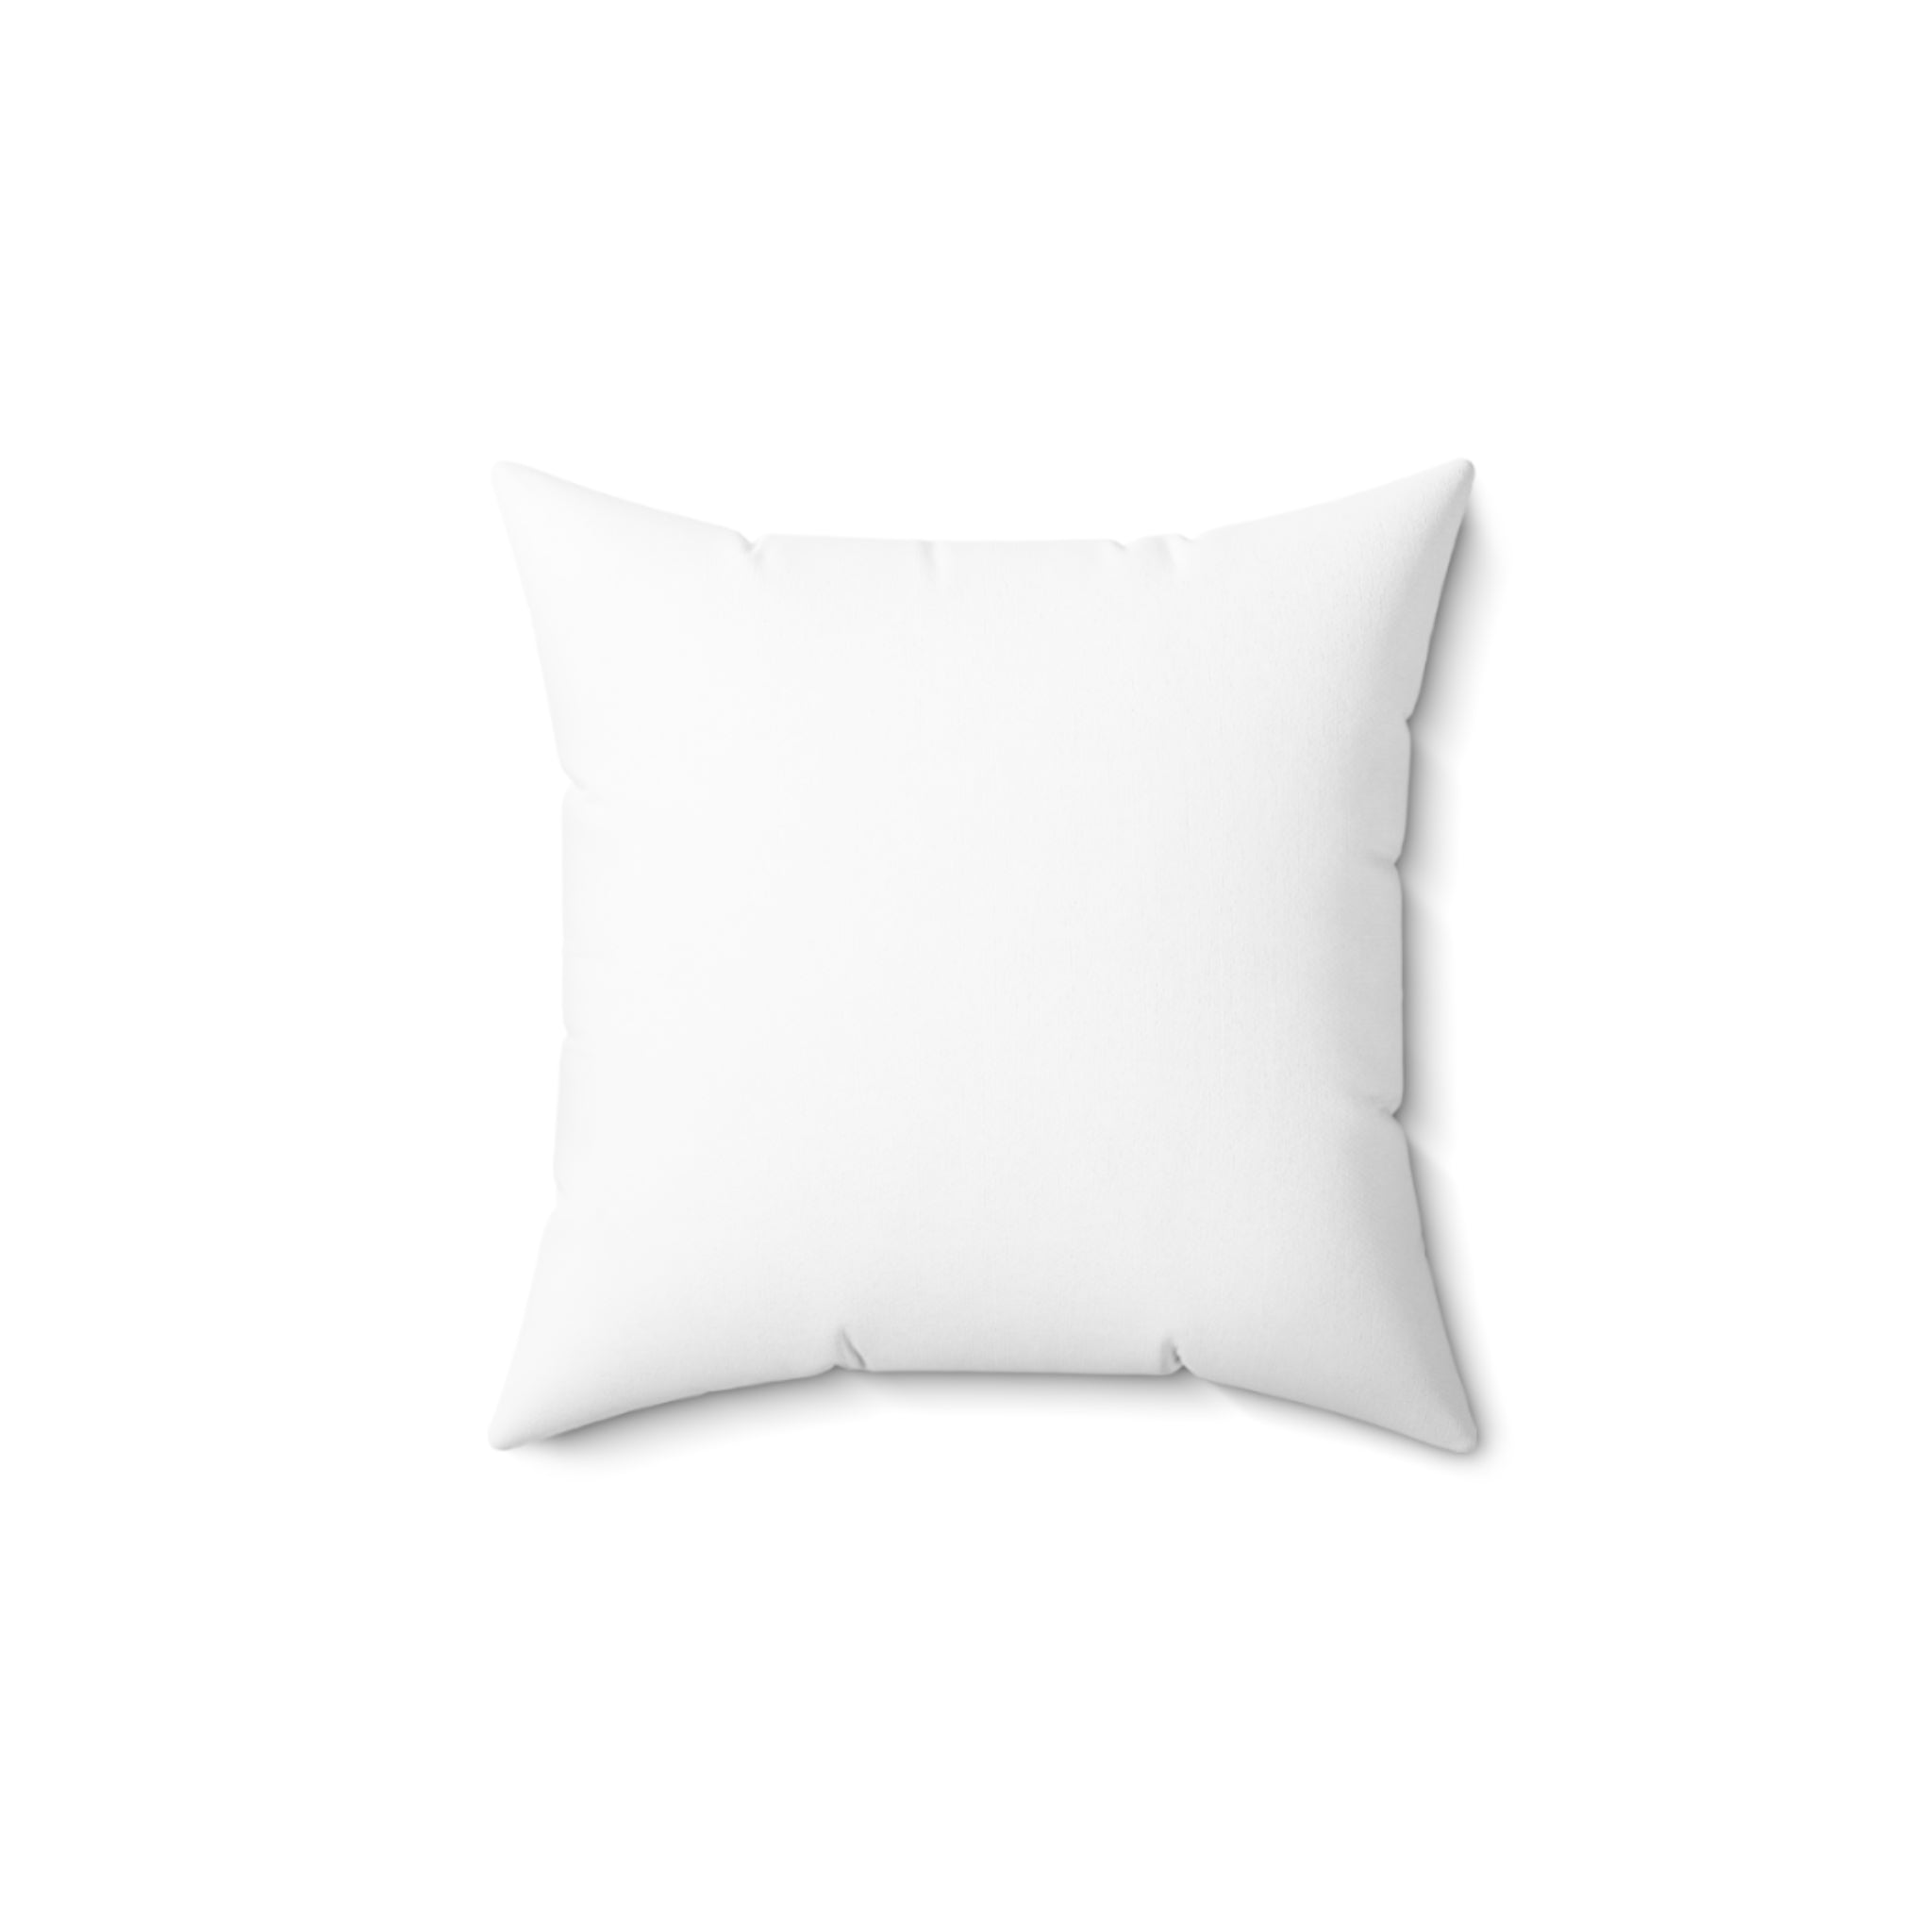 My Dear, On days when you feel overwhelmed remember who's daughter you are..Spun Polyester Square Pillow